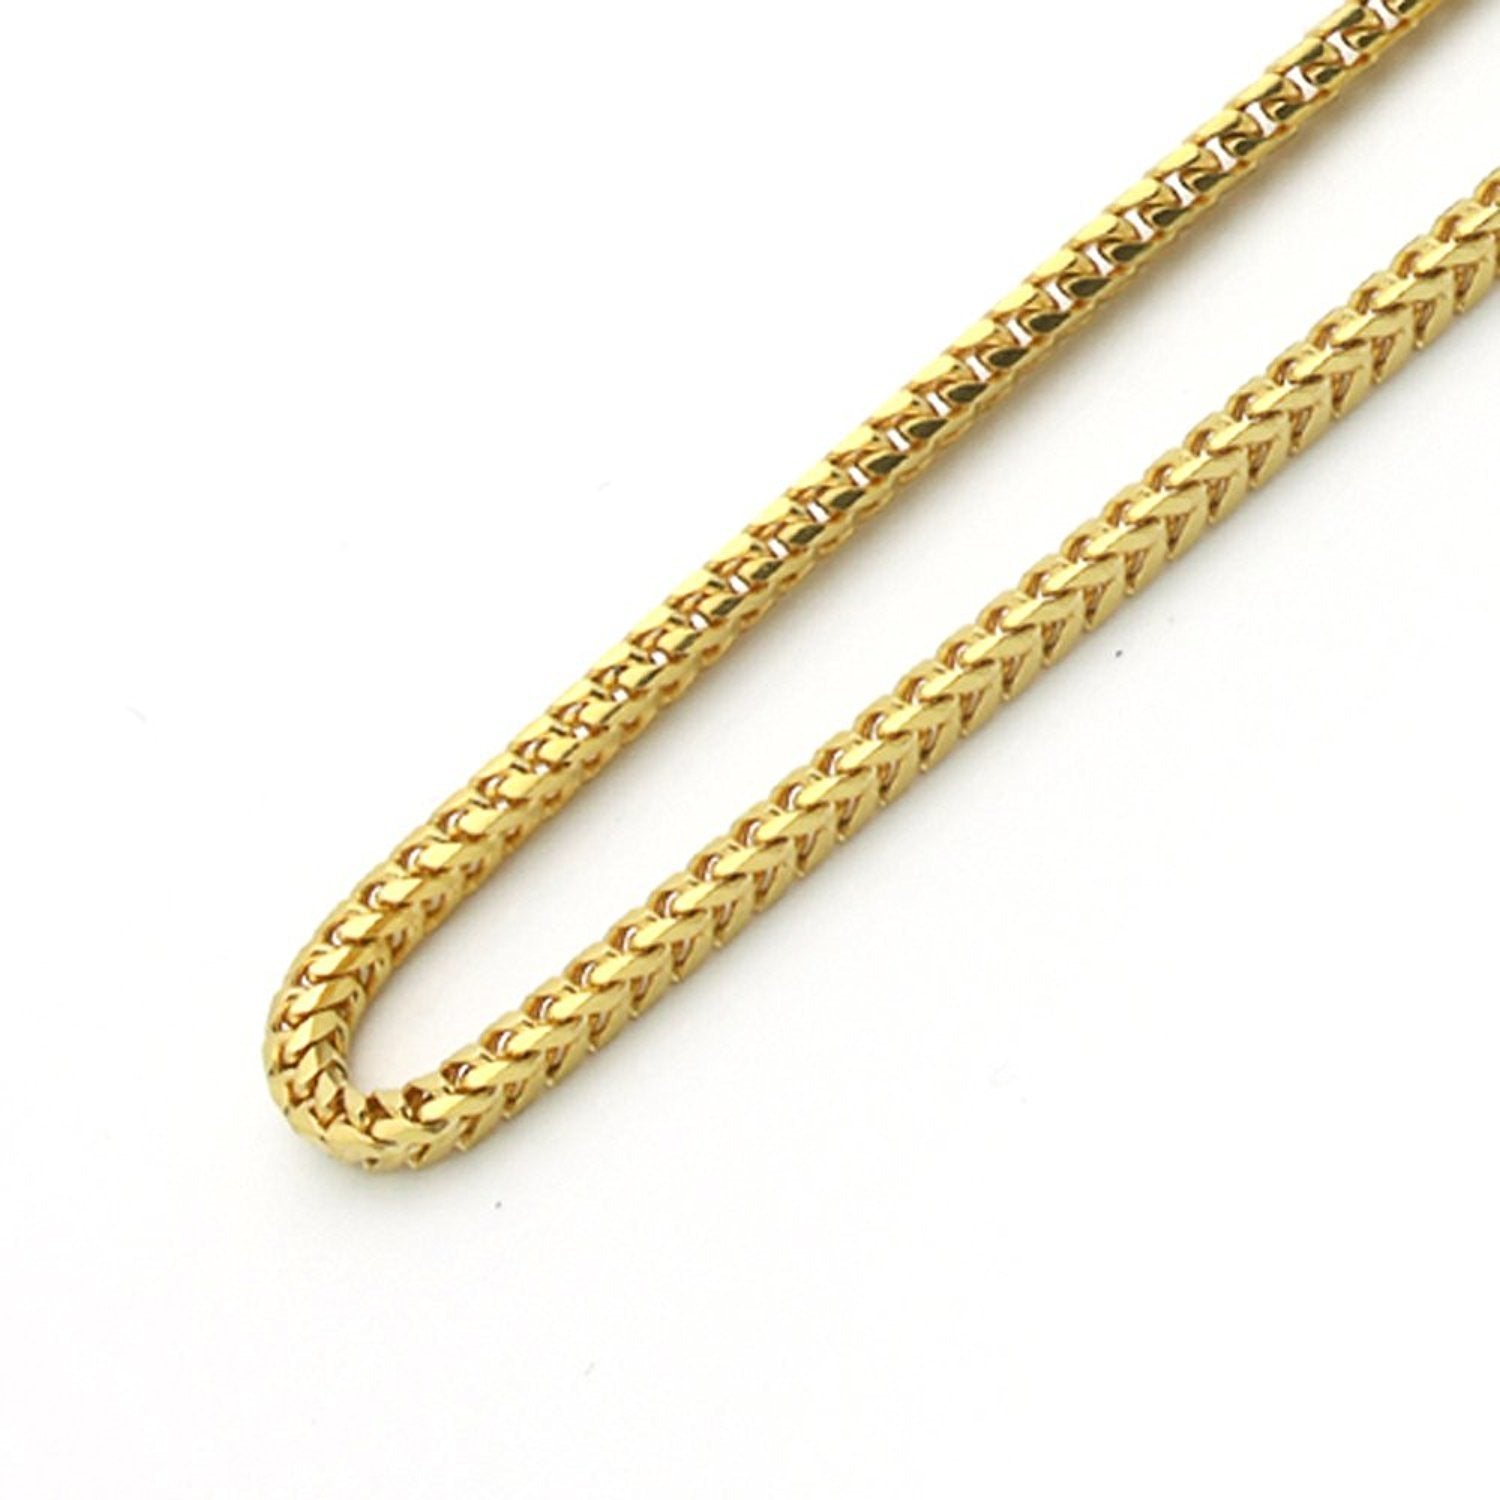 10K Gold Franco Chain 22'' 3mm Approximated